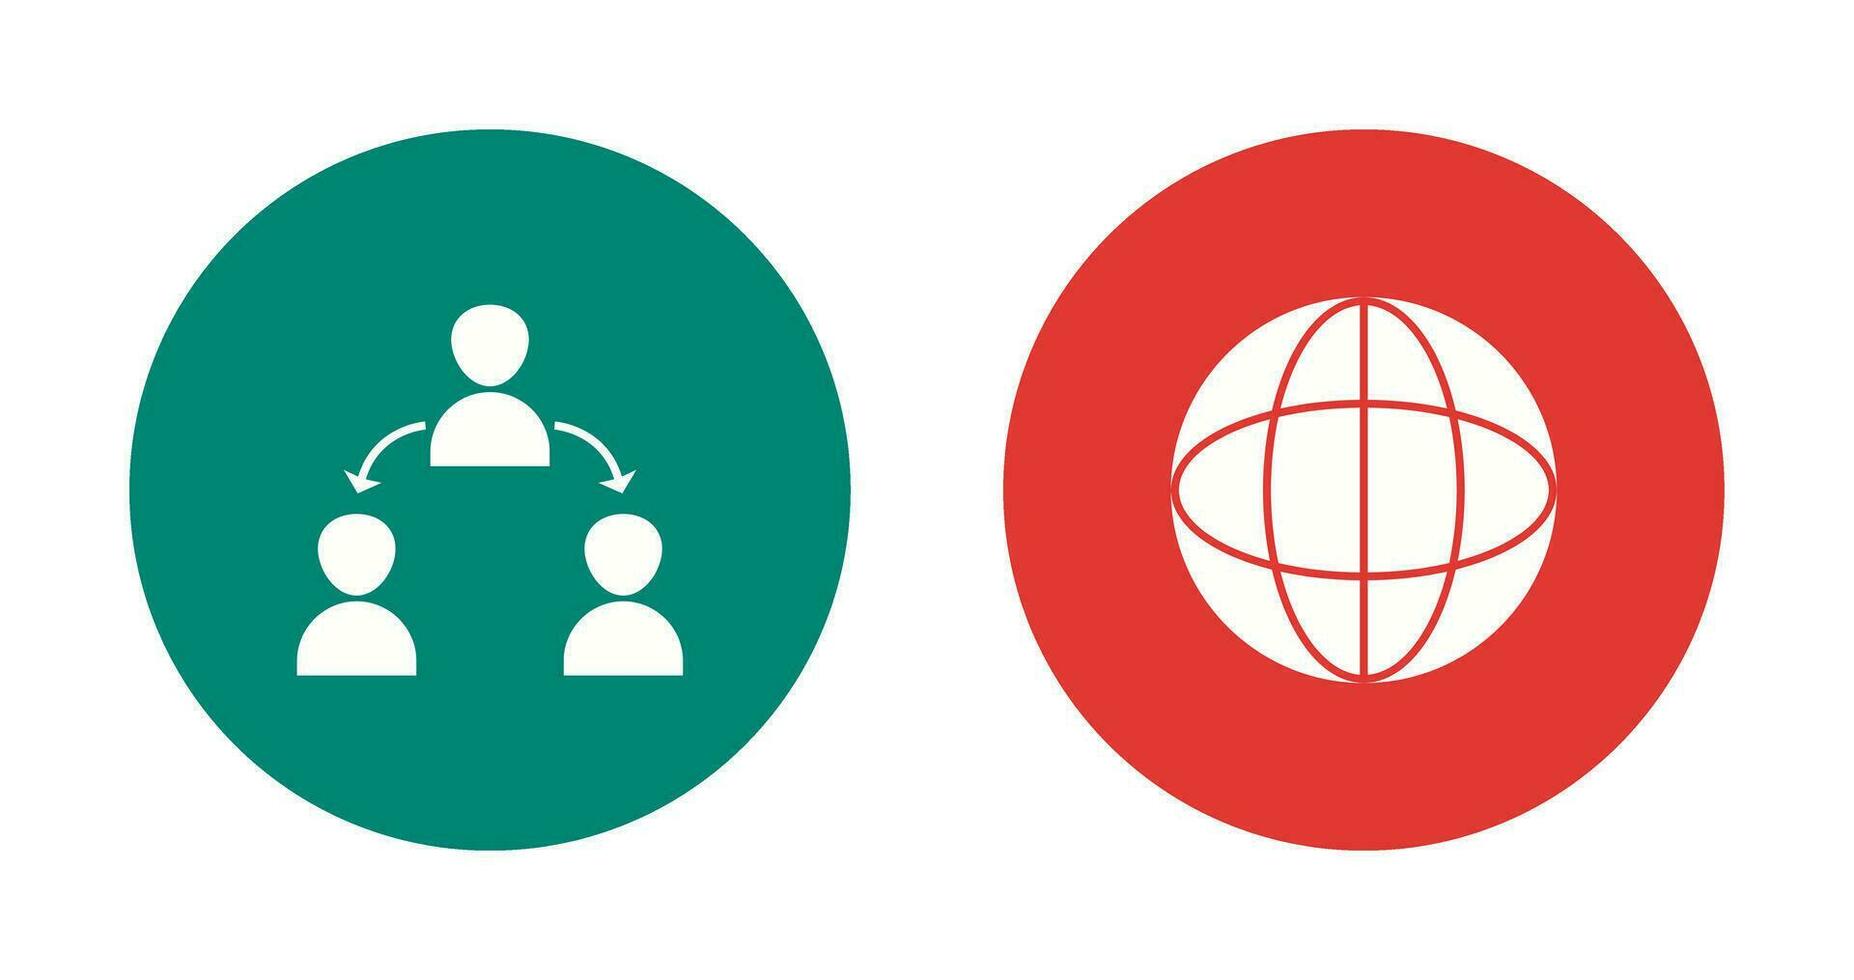 connected user and globe Icon vector